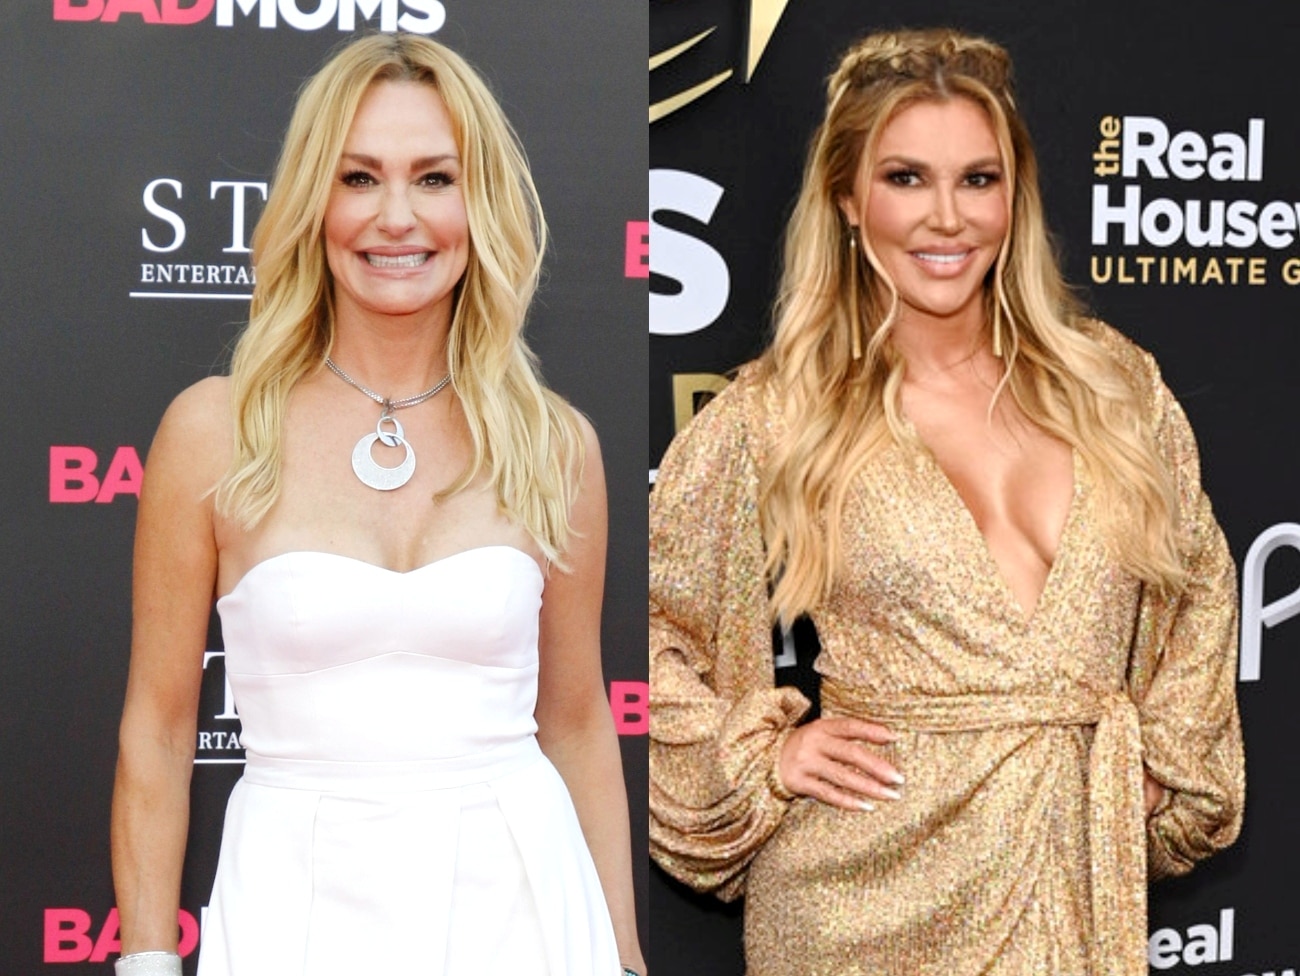 Taylor Armstrong Claps Back at Brandi's Claims of "Self-Producing" on RHUGT, Targets Her Efforts for Attention, and Suggests She's Immature, Plus Talks RHOBH Return